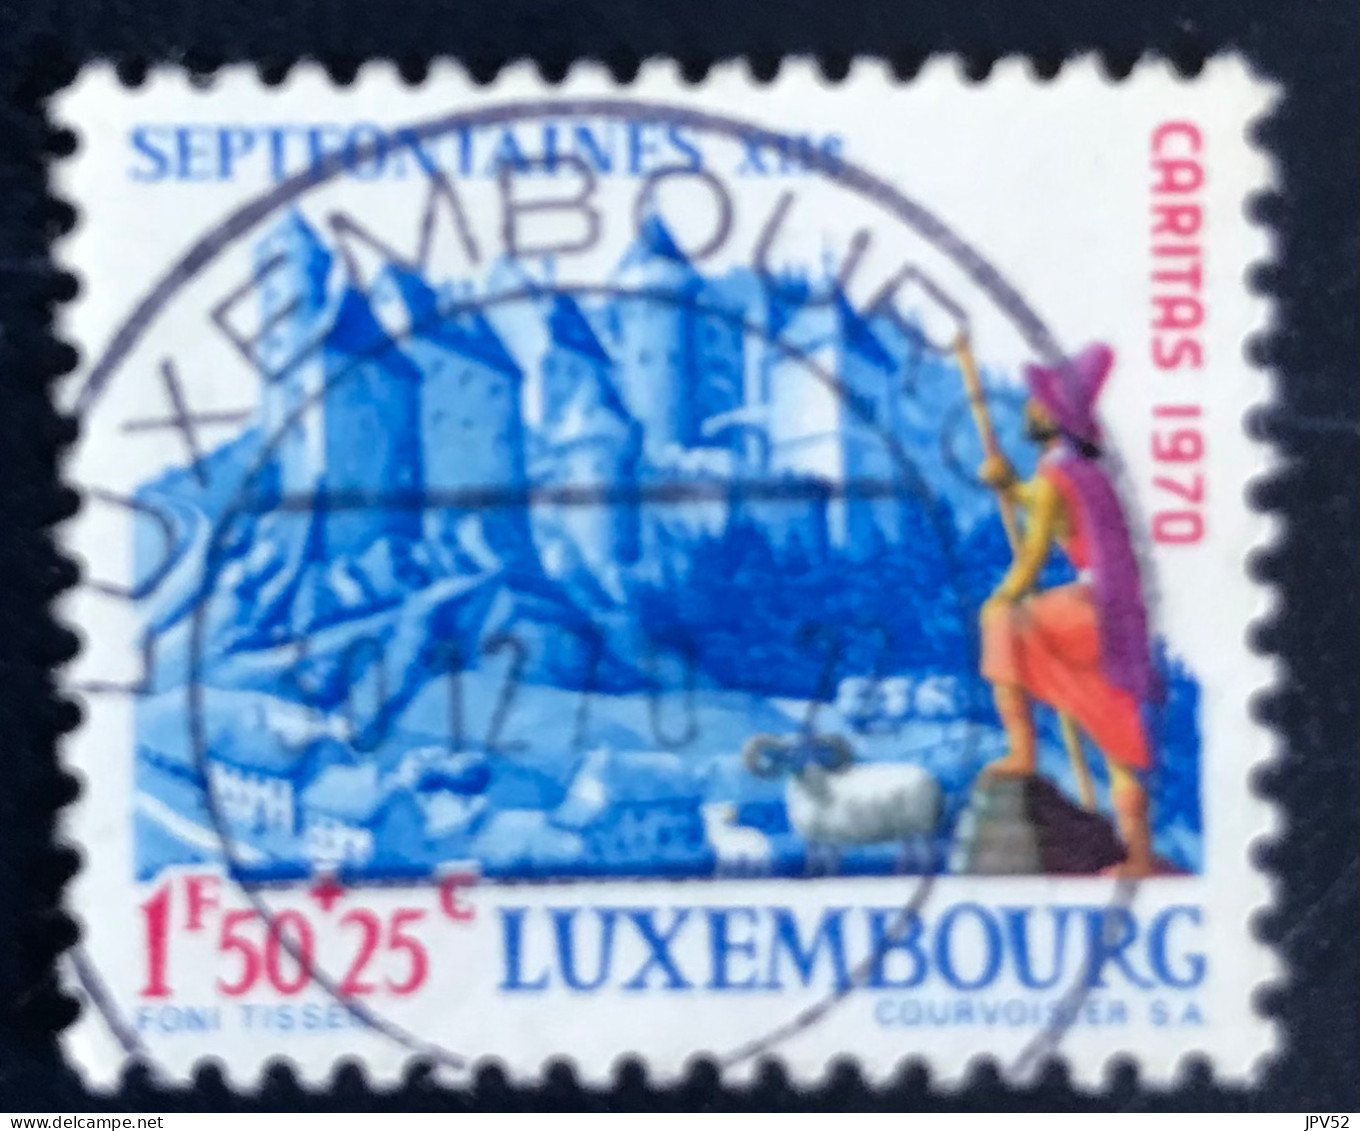 Luxembourg - Luxemburg - C18/34 - 1970 - (°)used - Michel 815 - Burcht Van Septfontaines - LUXEMBOURG - Usati